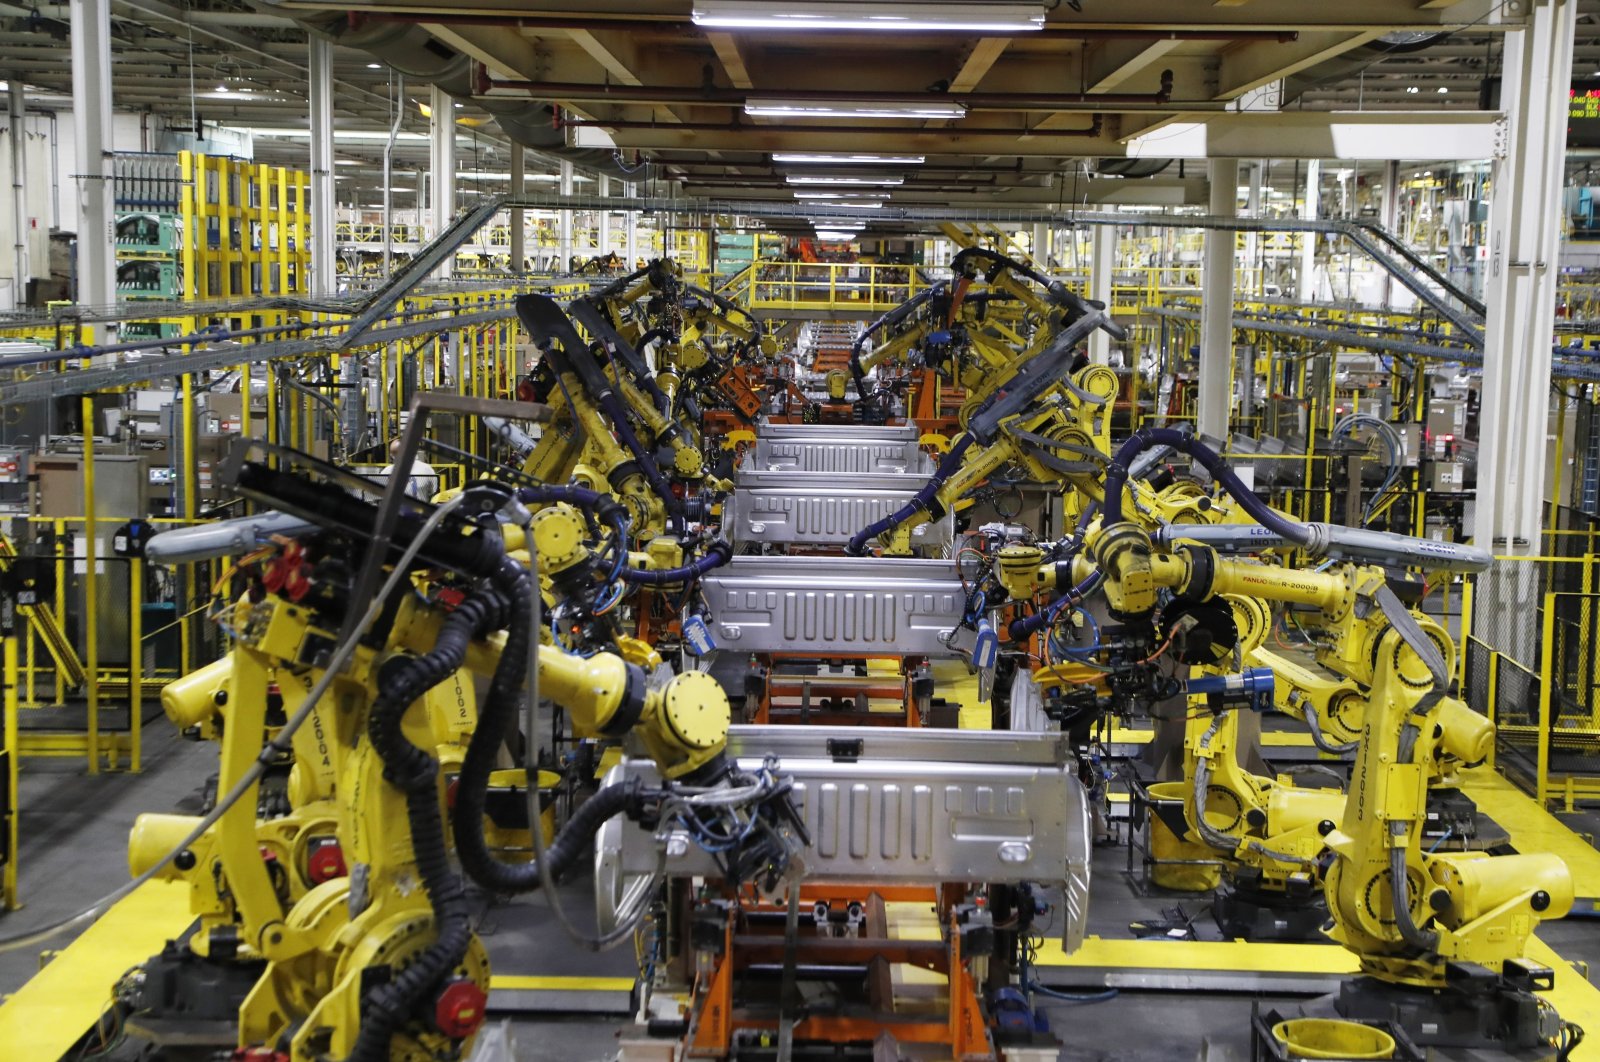 Robots weld the bed of a 2018 Ford F-150 truck on the assembly line at the Ford Rouge assembly plant in Dearborn, Michigan, U.S., Sept. 27, 2018. (AP Photo)